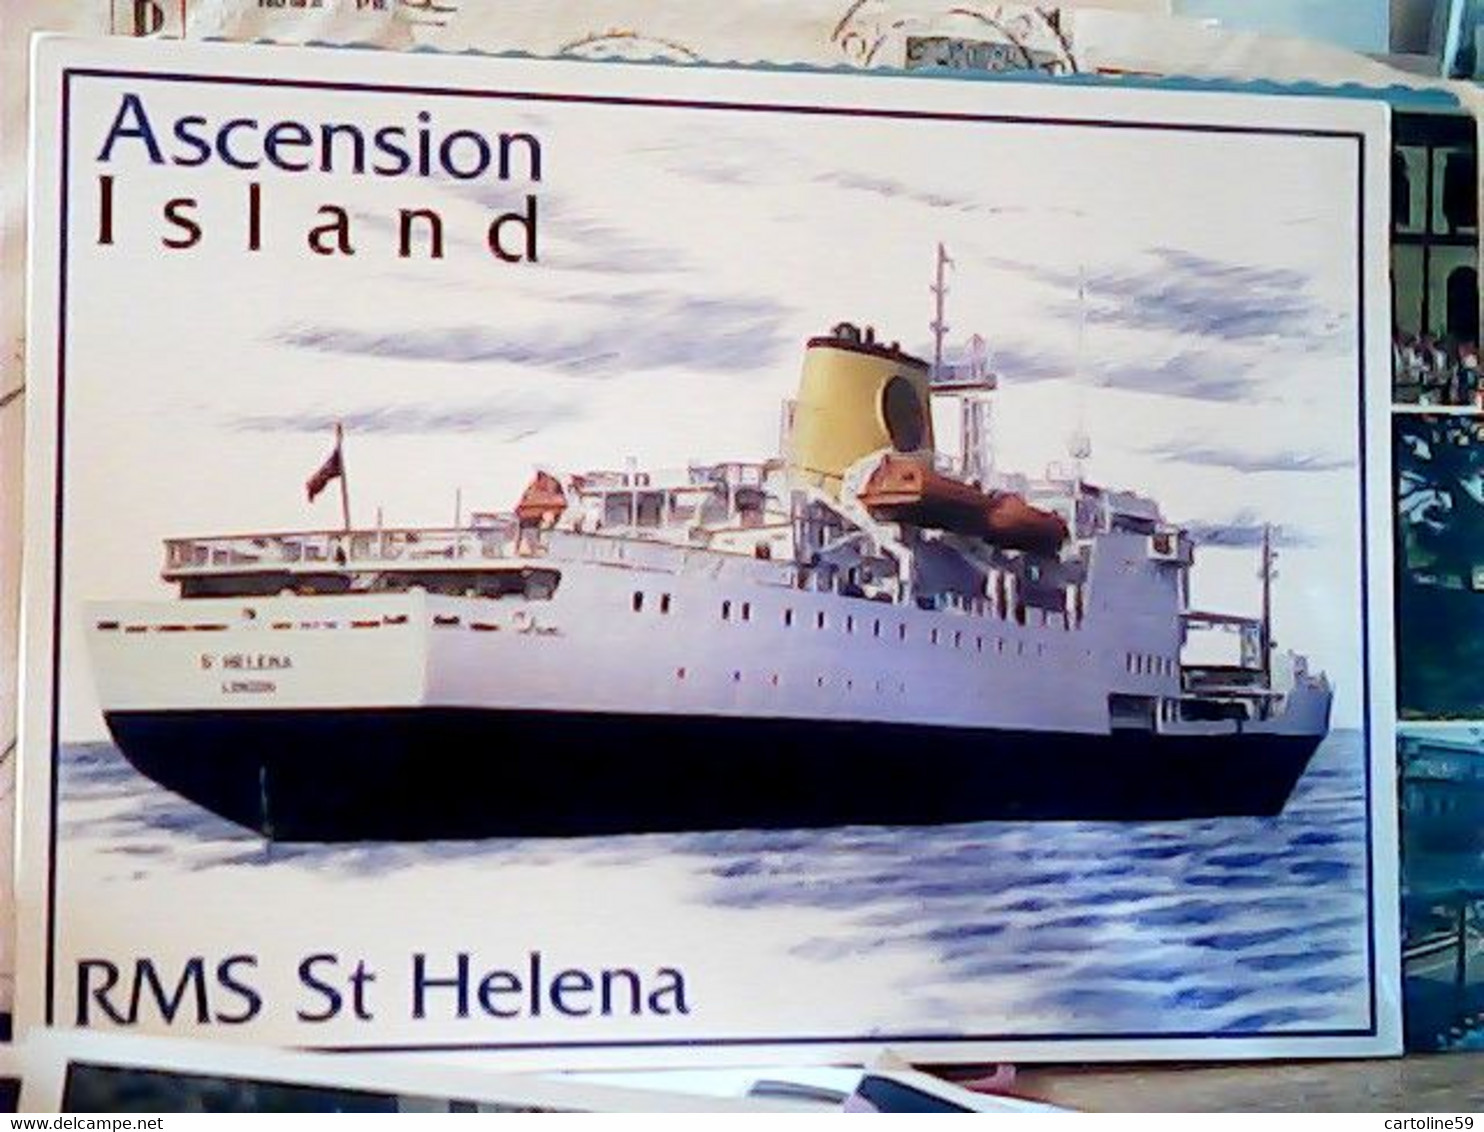 ASCENSION ISLAND NAVE SHIP FERRY  RMS ST HELENA N2000 JG9478 - Ascensione